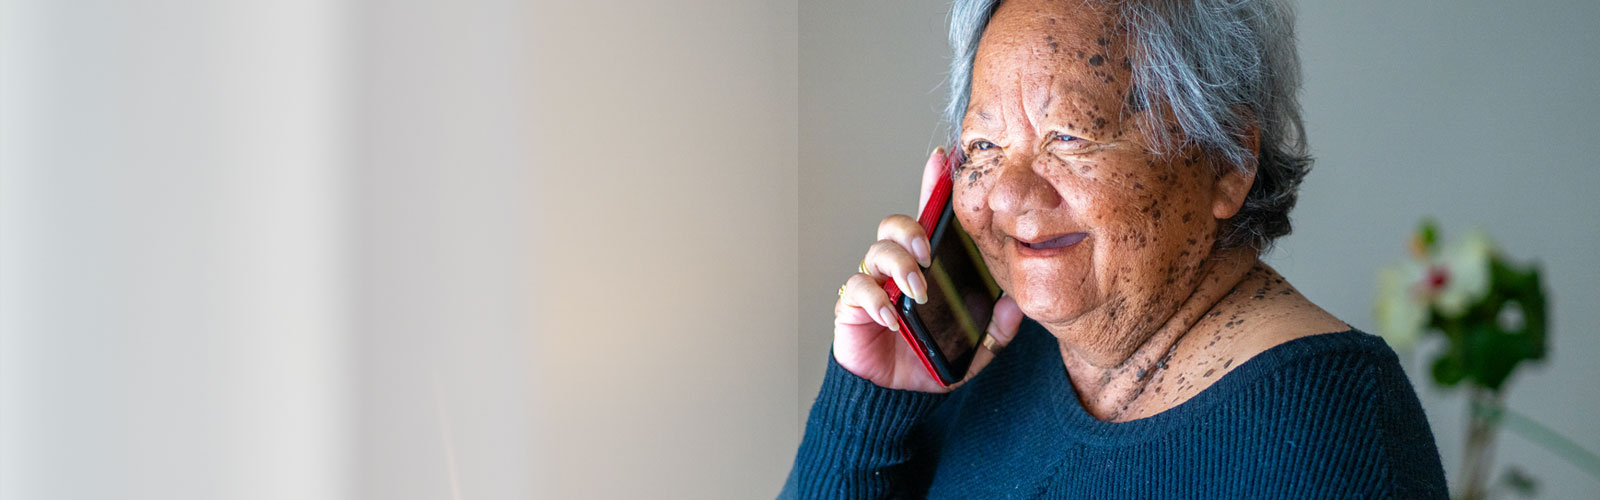 An older woman, smiling, speaking on the phone